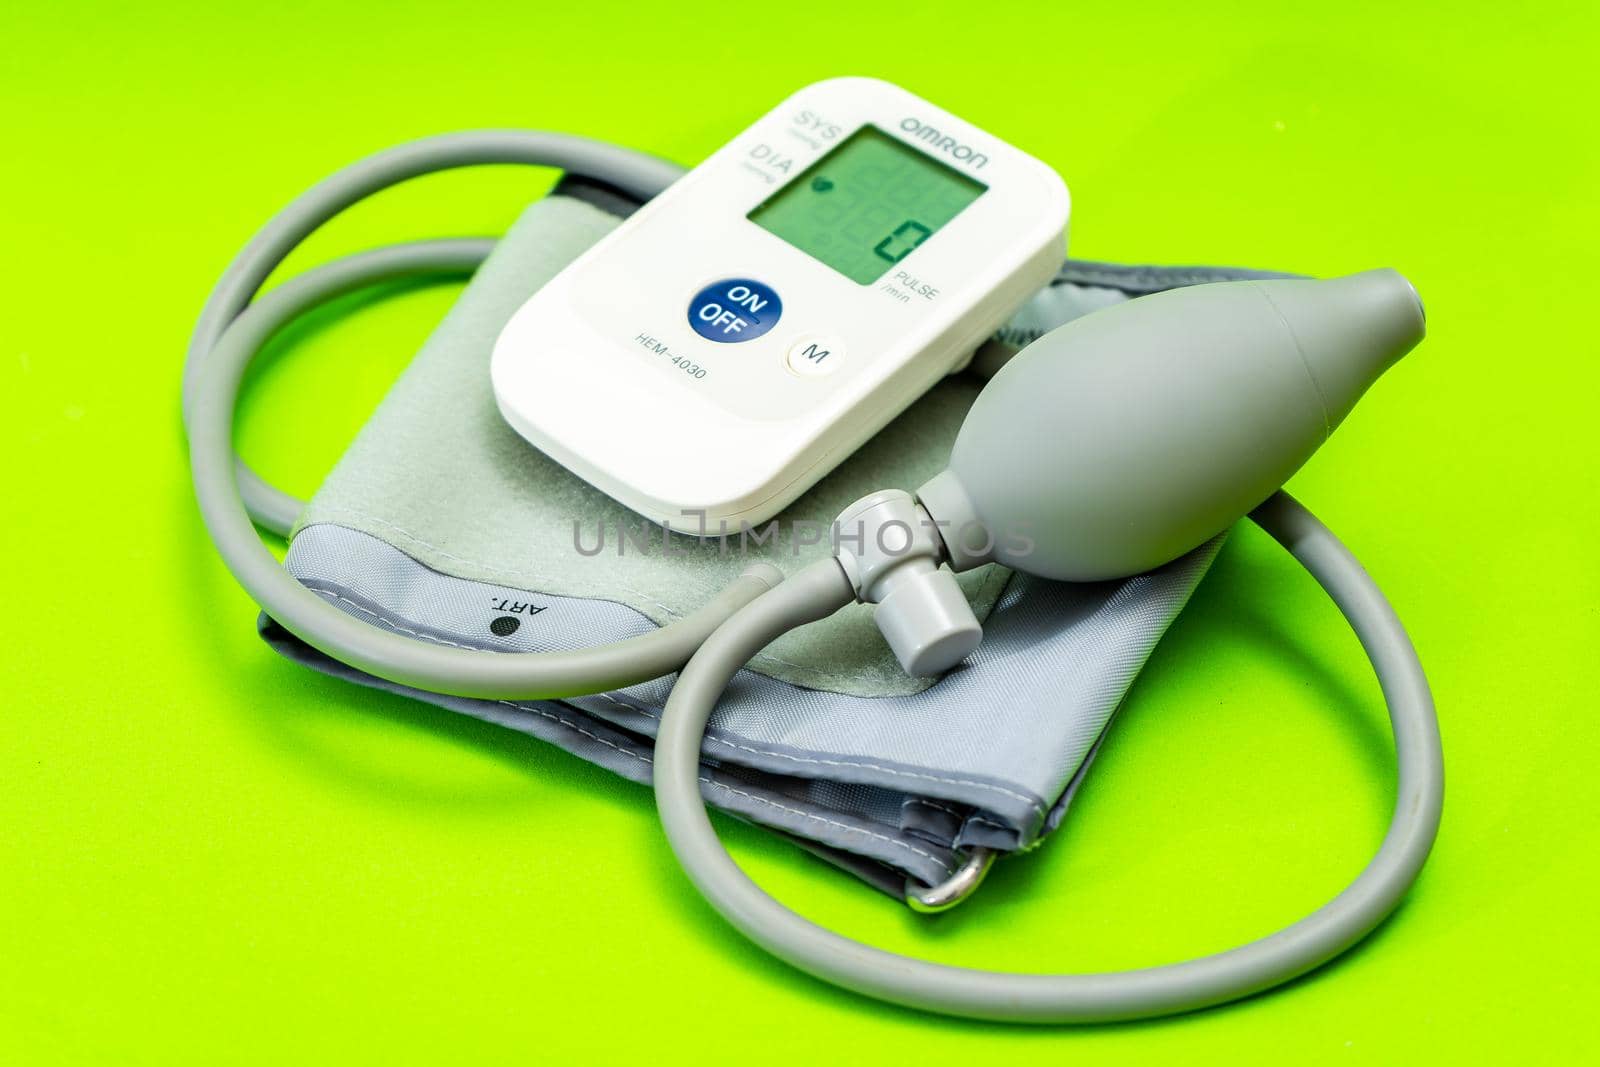 Automatic blood pressure monitor or blood pressure meter on green background. Medical equipment. by hdcaputo